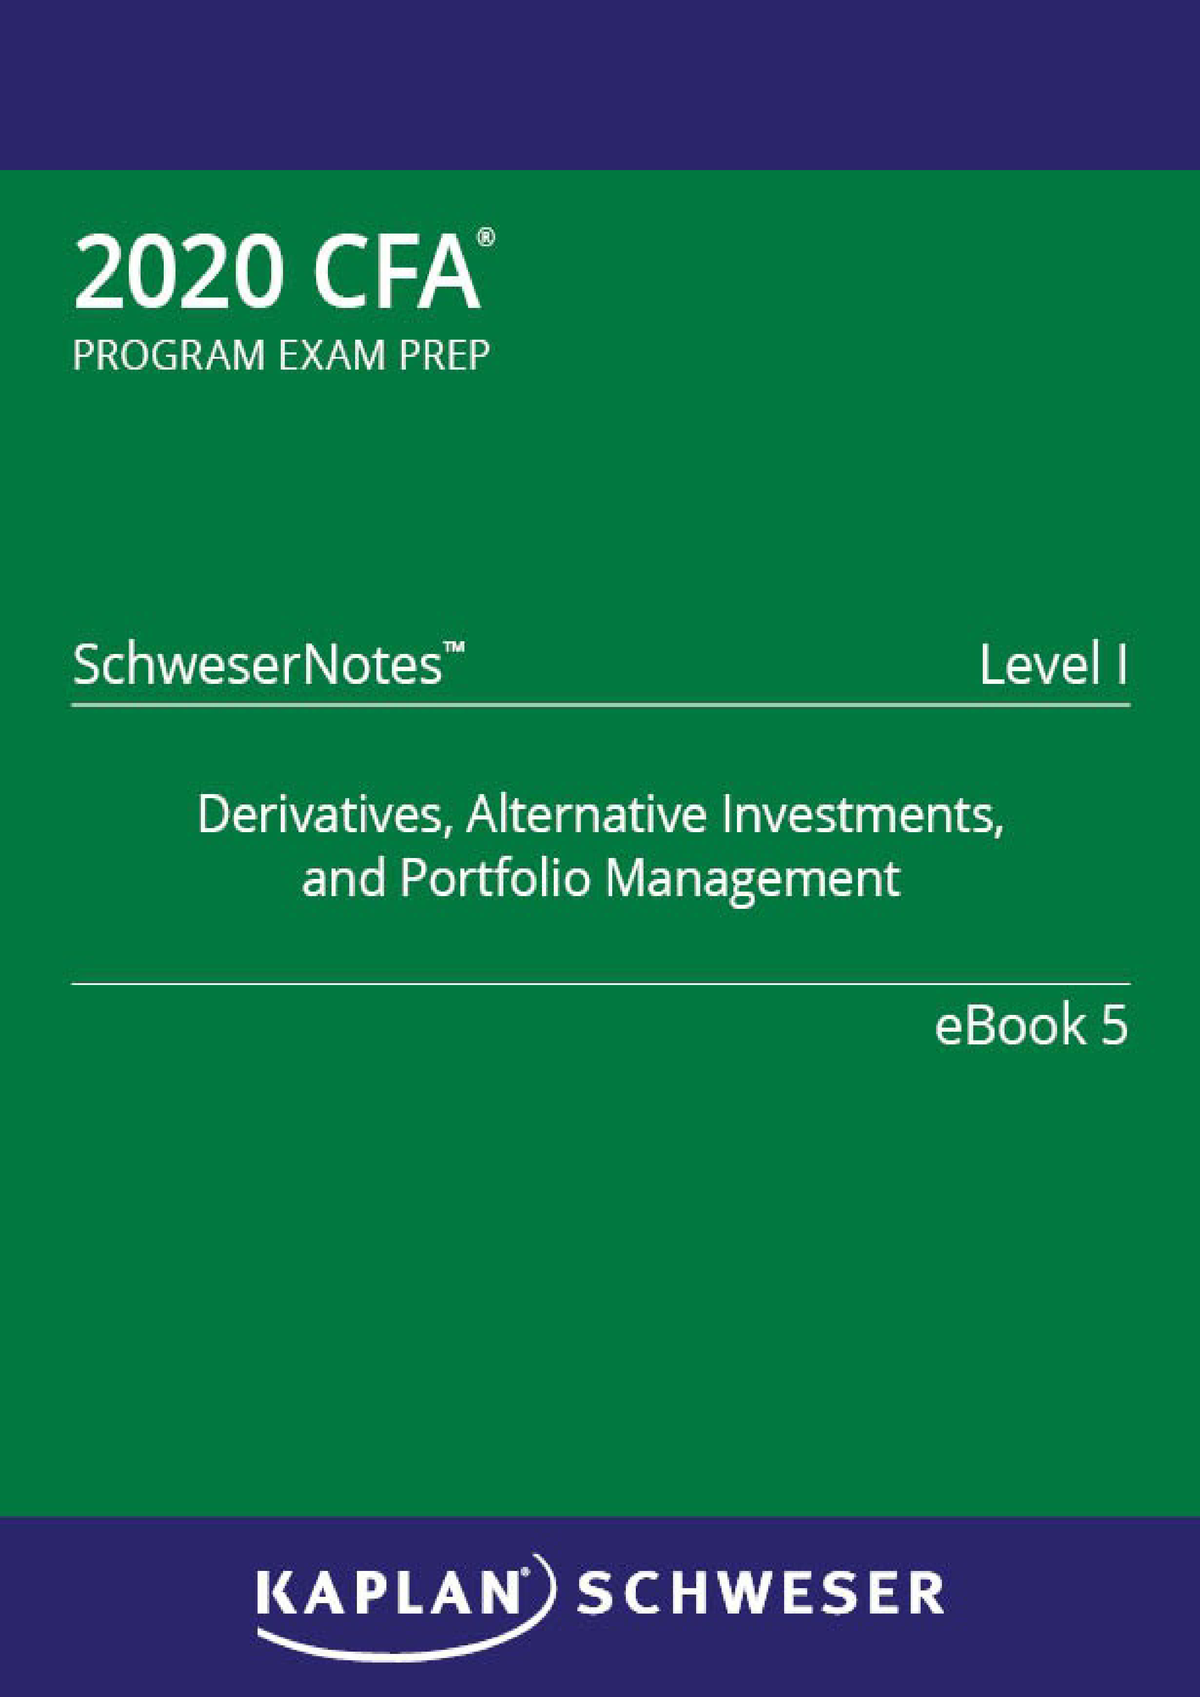 Cfa level 1 book 3 financial reporting and analysis reversal bar on forex